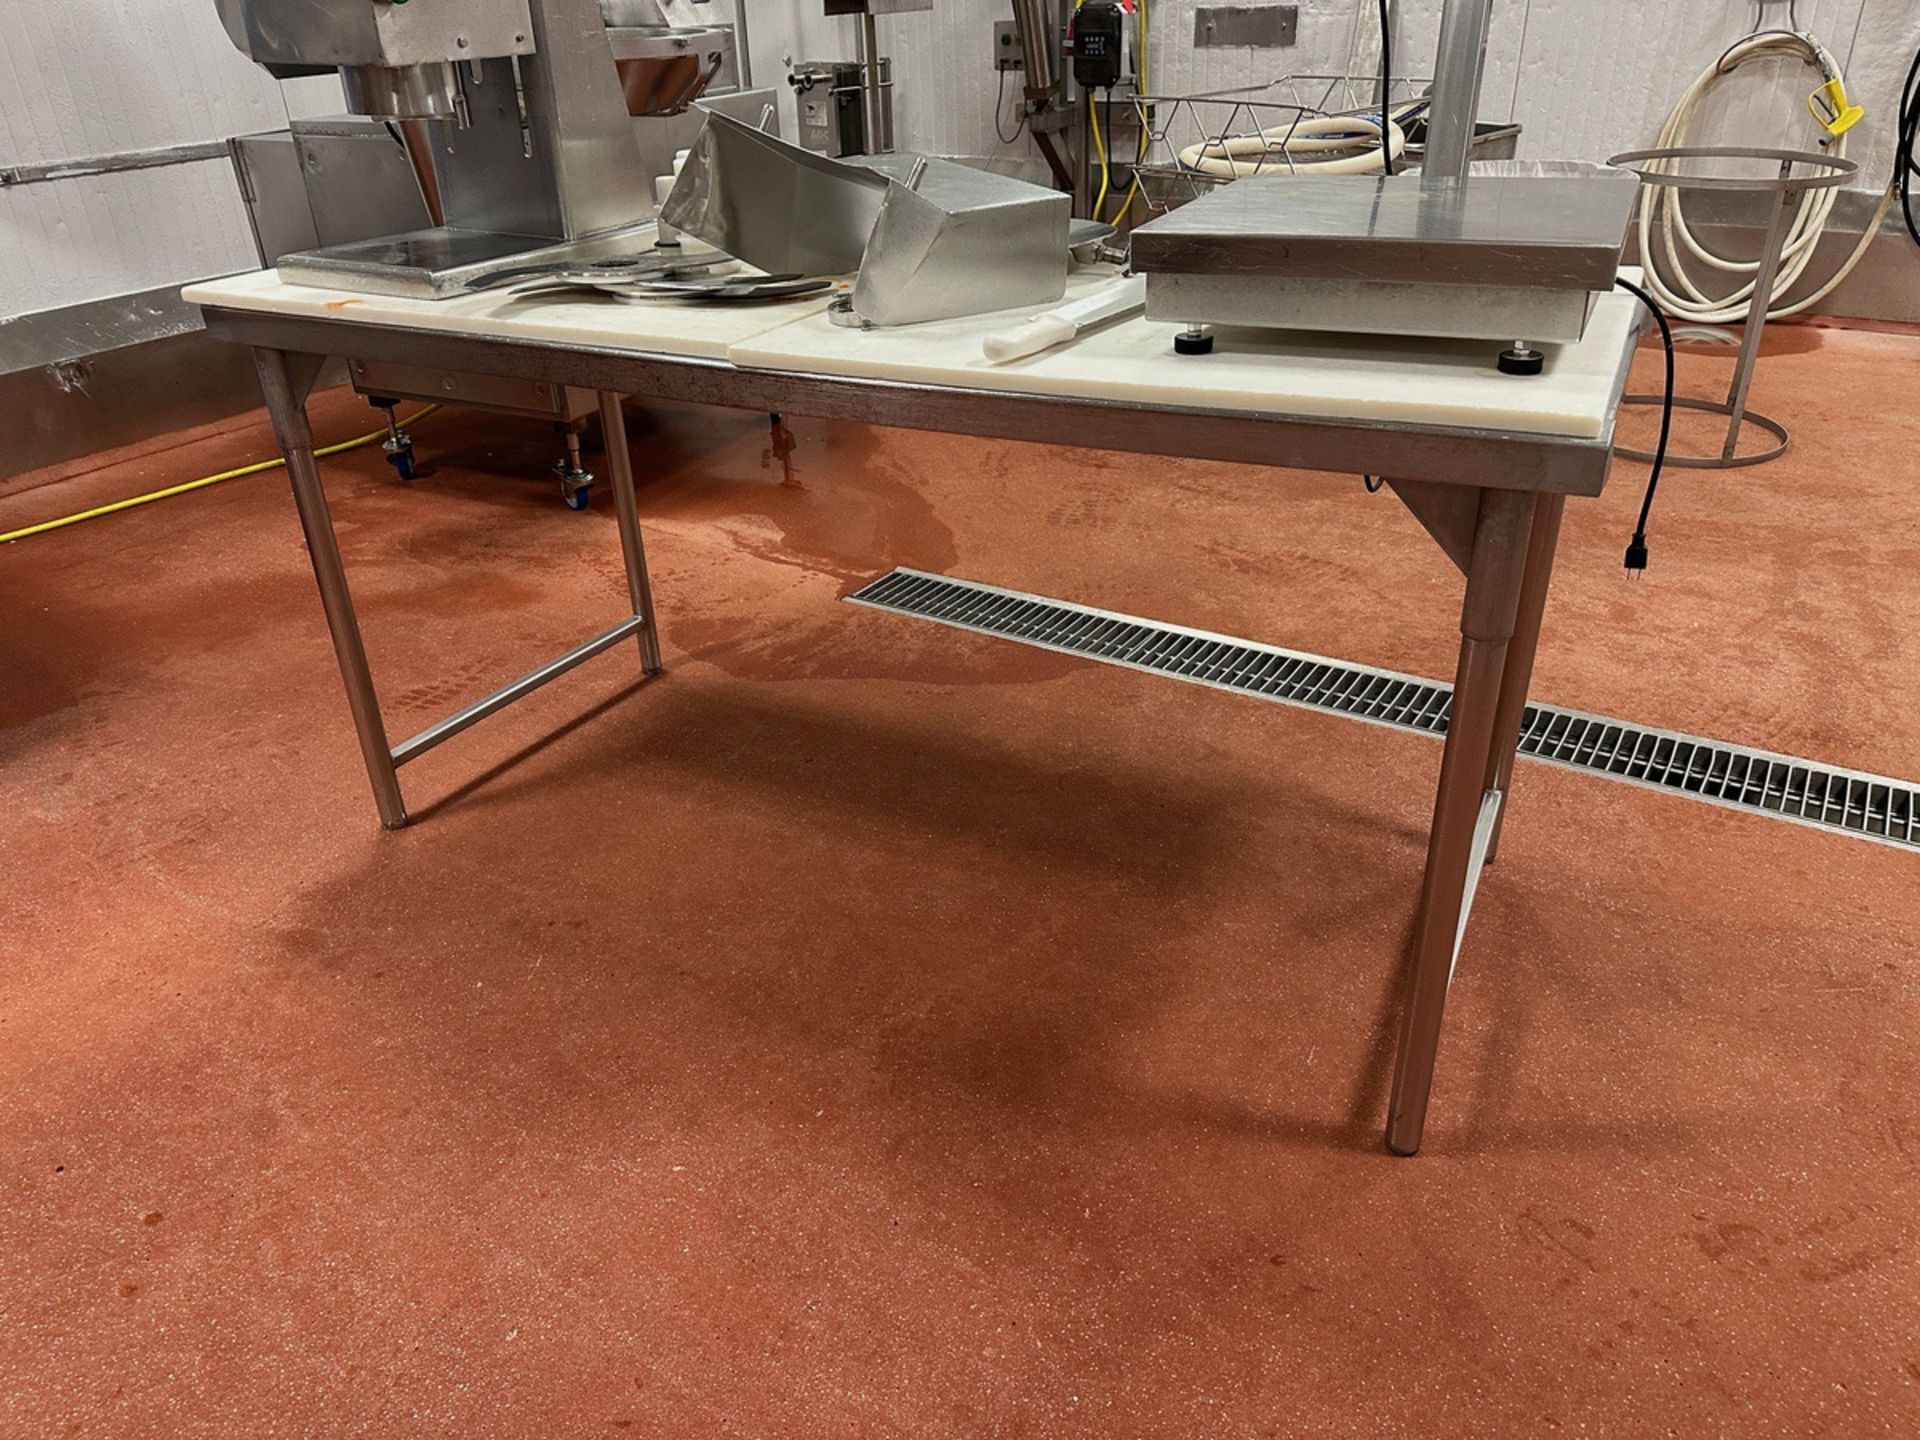 (4) Stainless Tables, 2' x 5'; 2'x6'; 2'x5' | Rig Fee $150 - Image 3 of 3